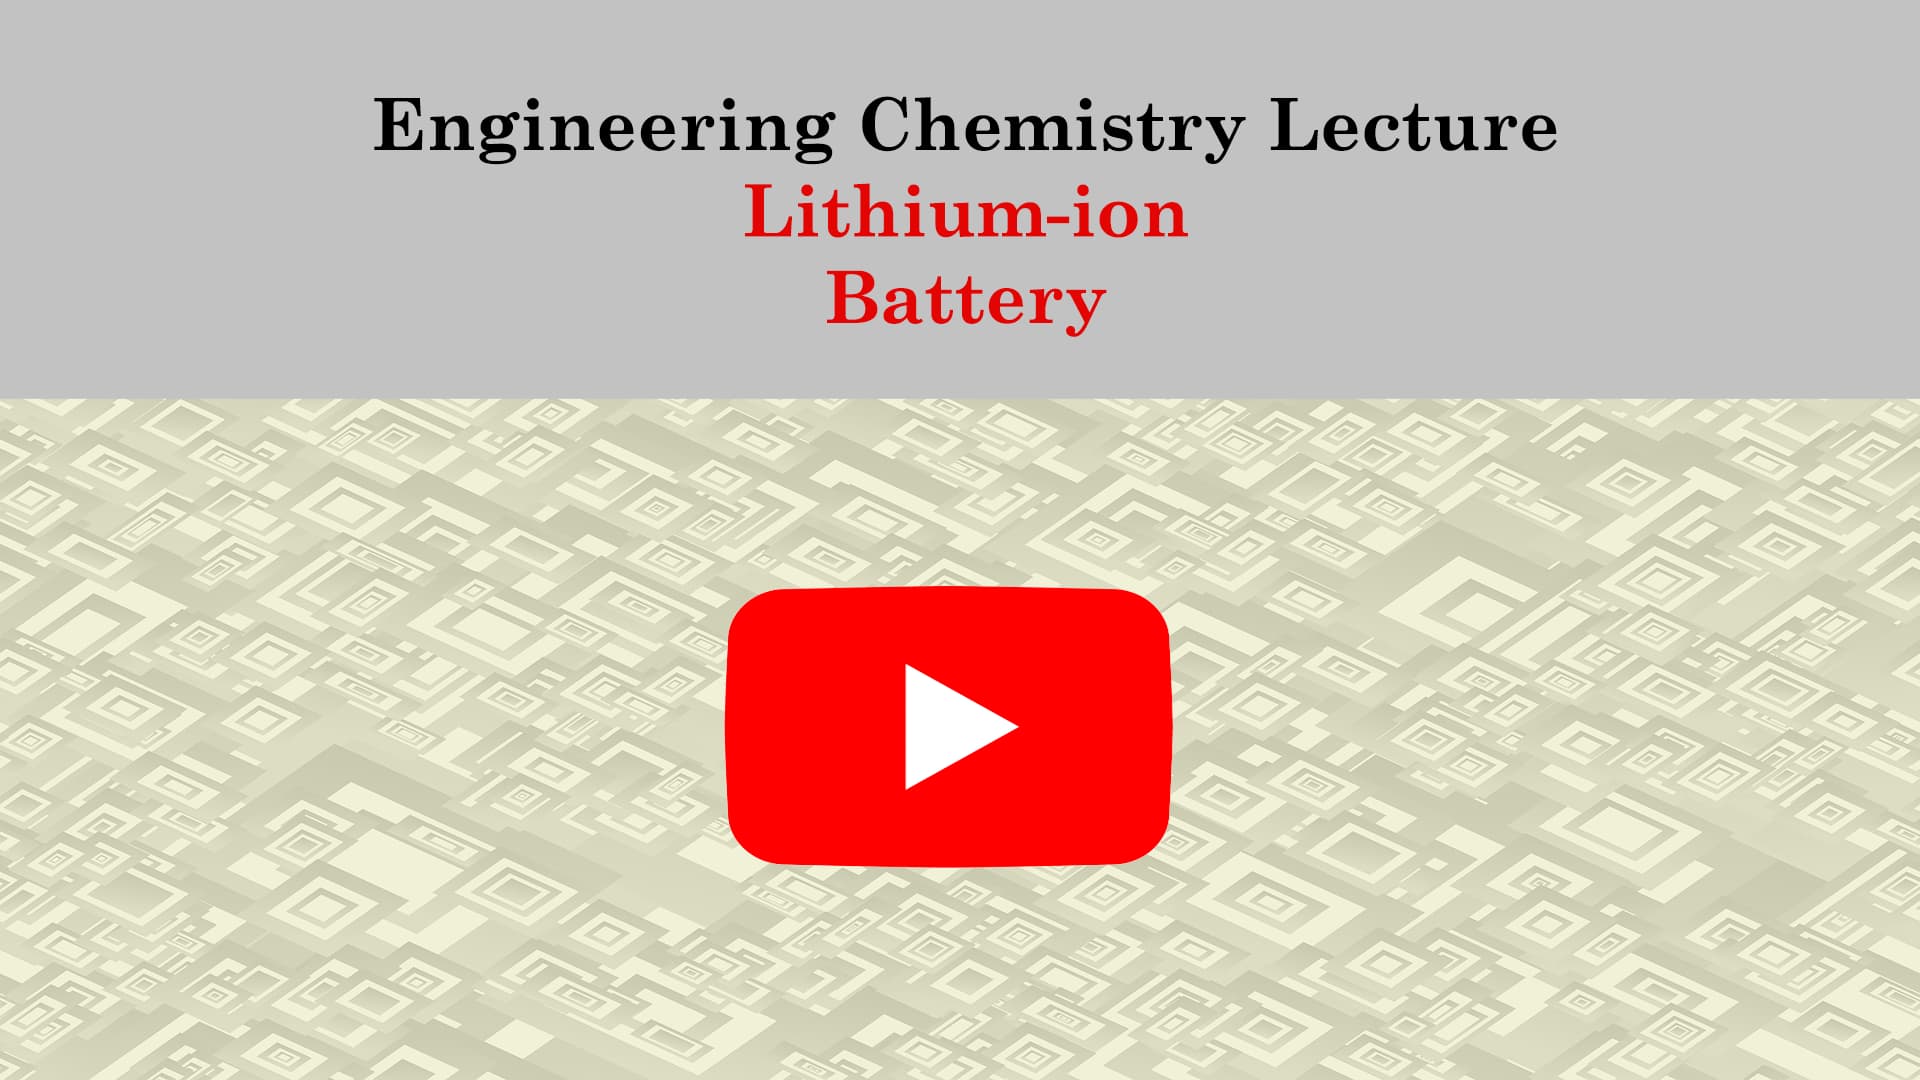 Lithium Ion Battery - Construction & Working | Vtu Engineering Chemistry